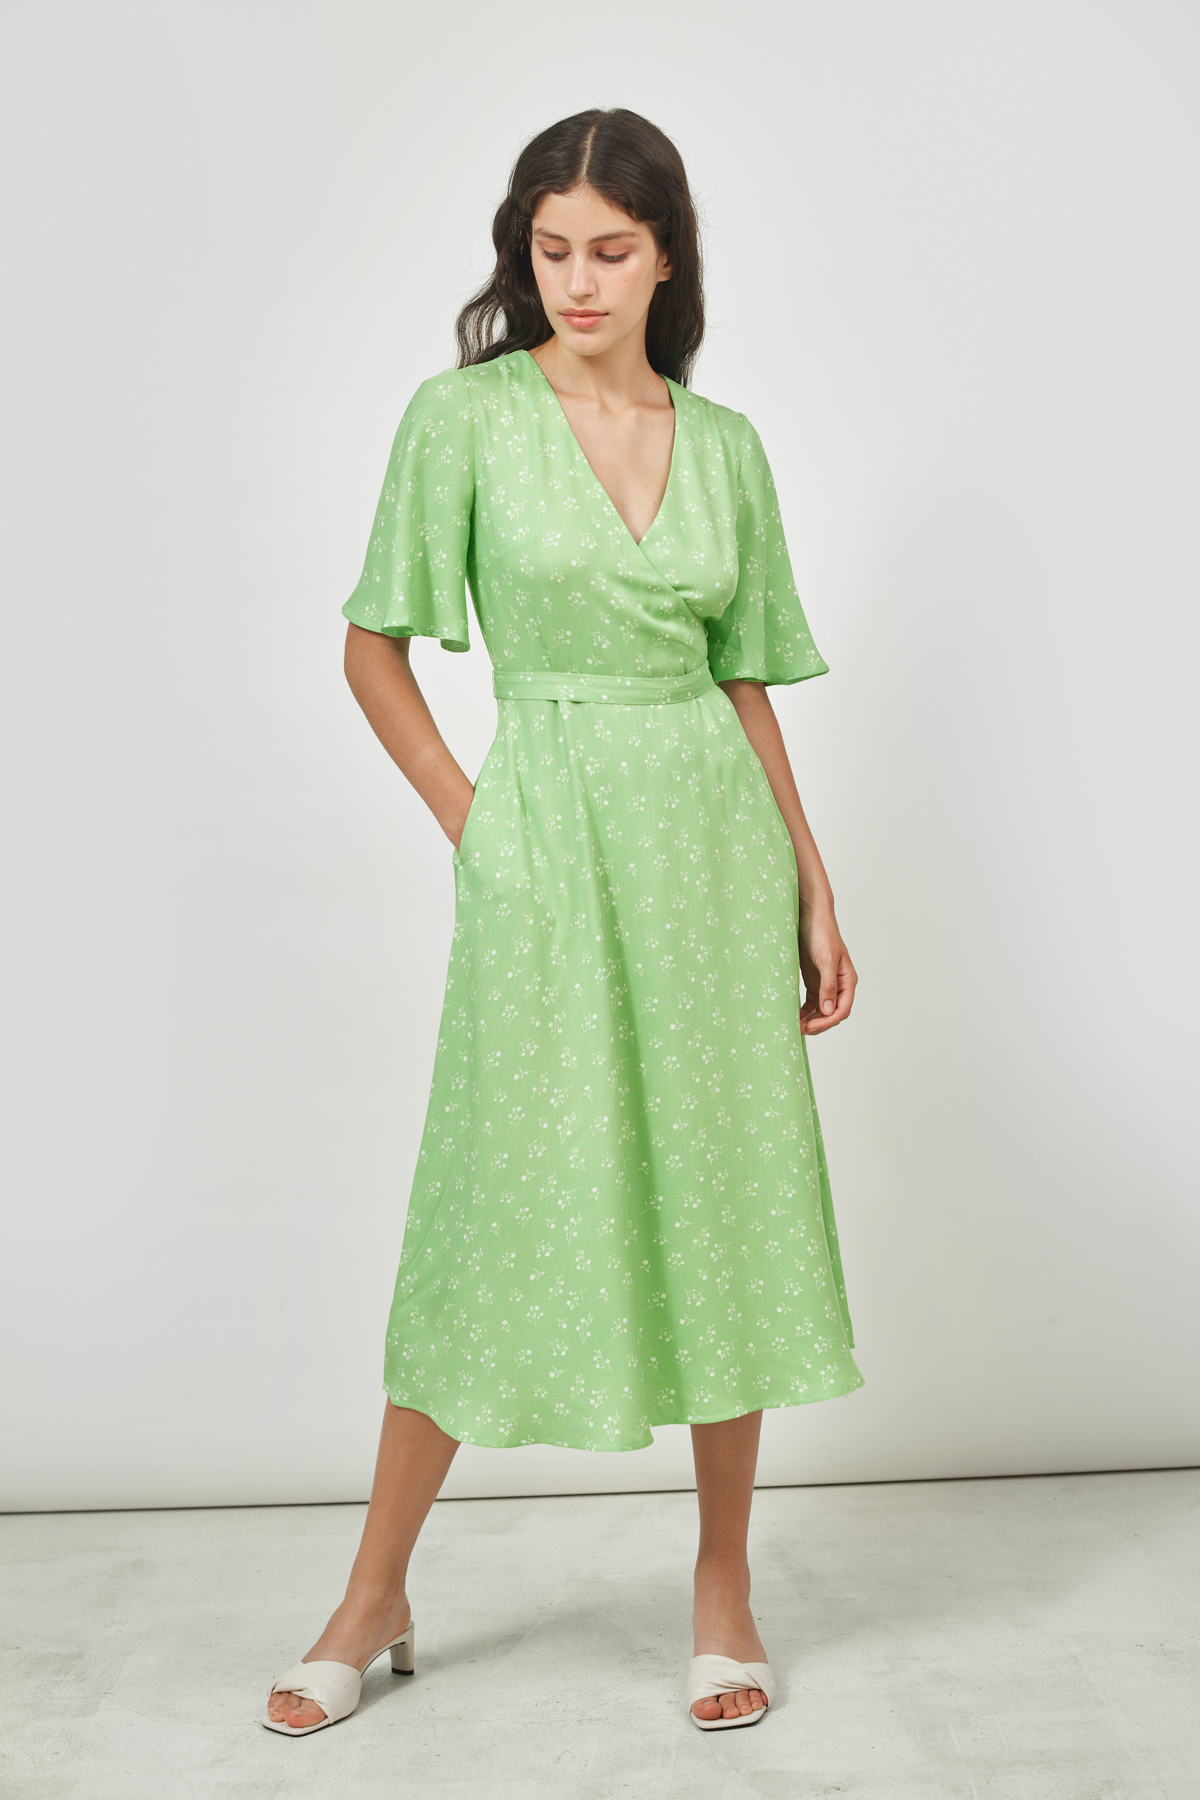 Midi dress in mint viscose with floral print, photo 1